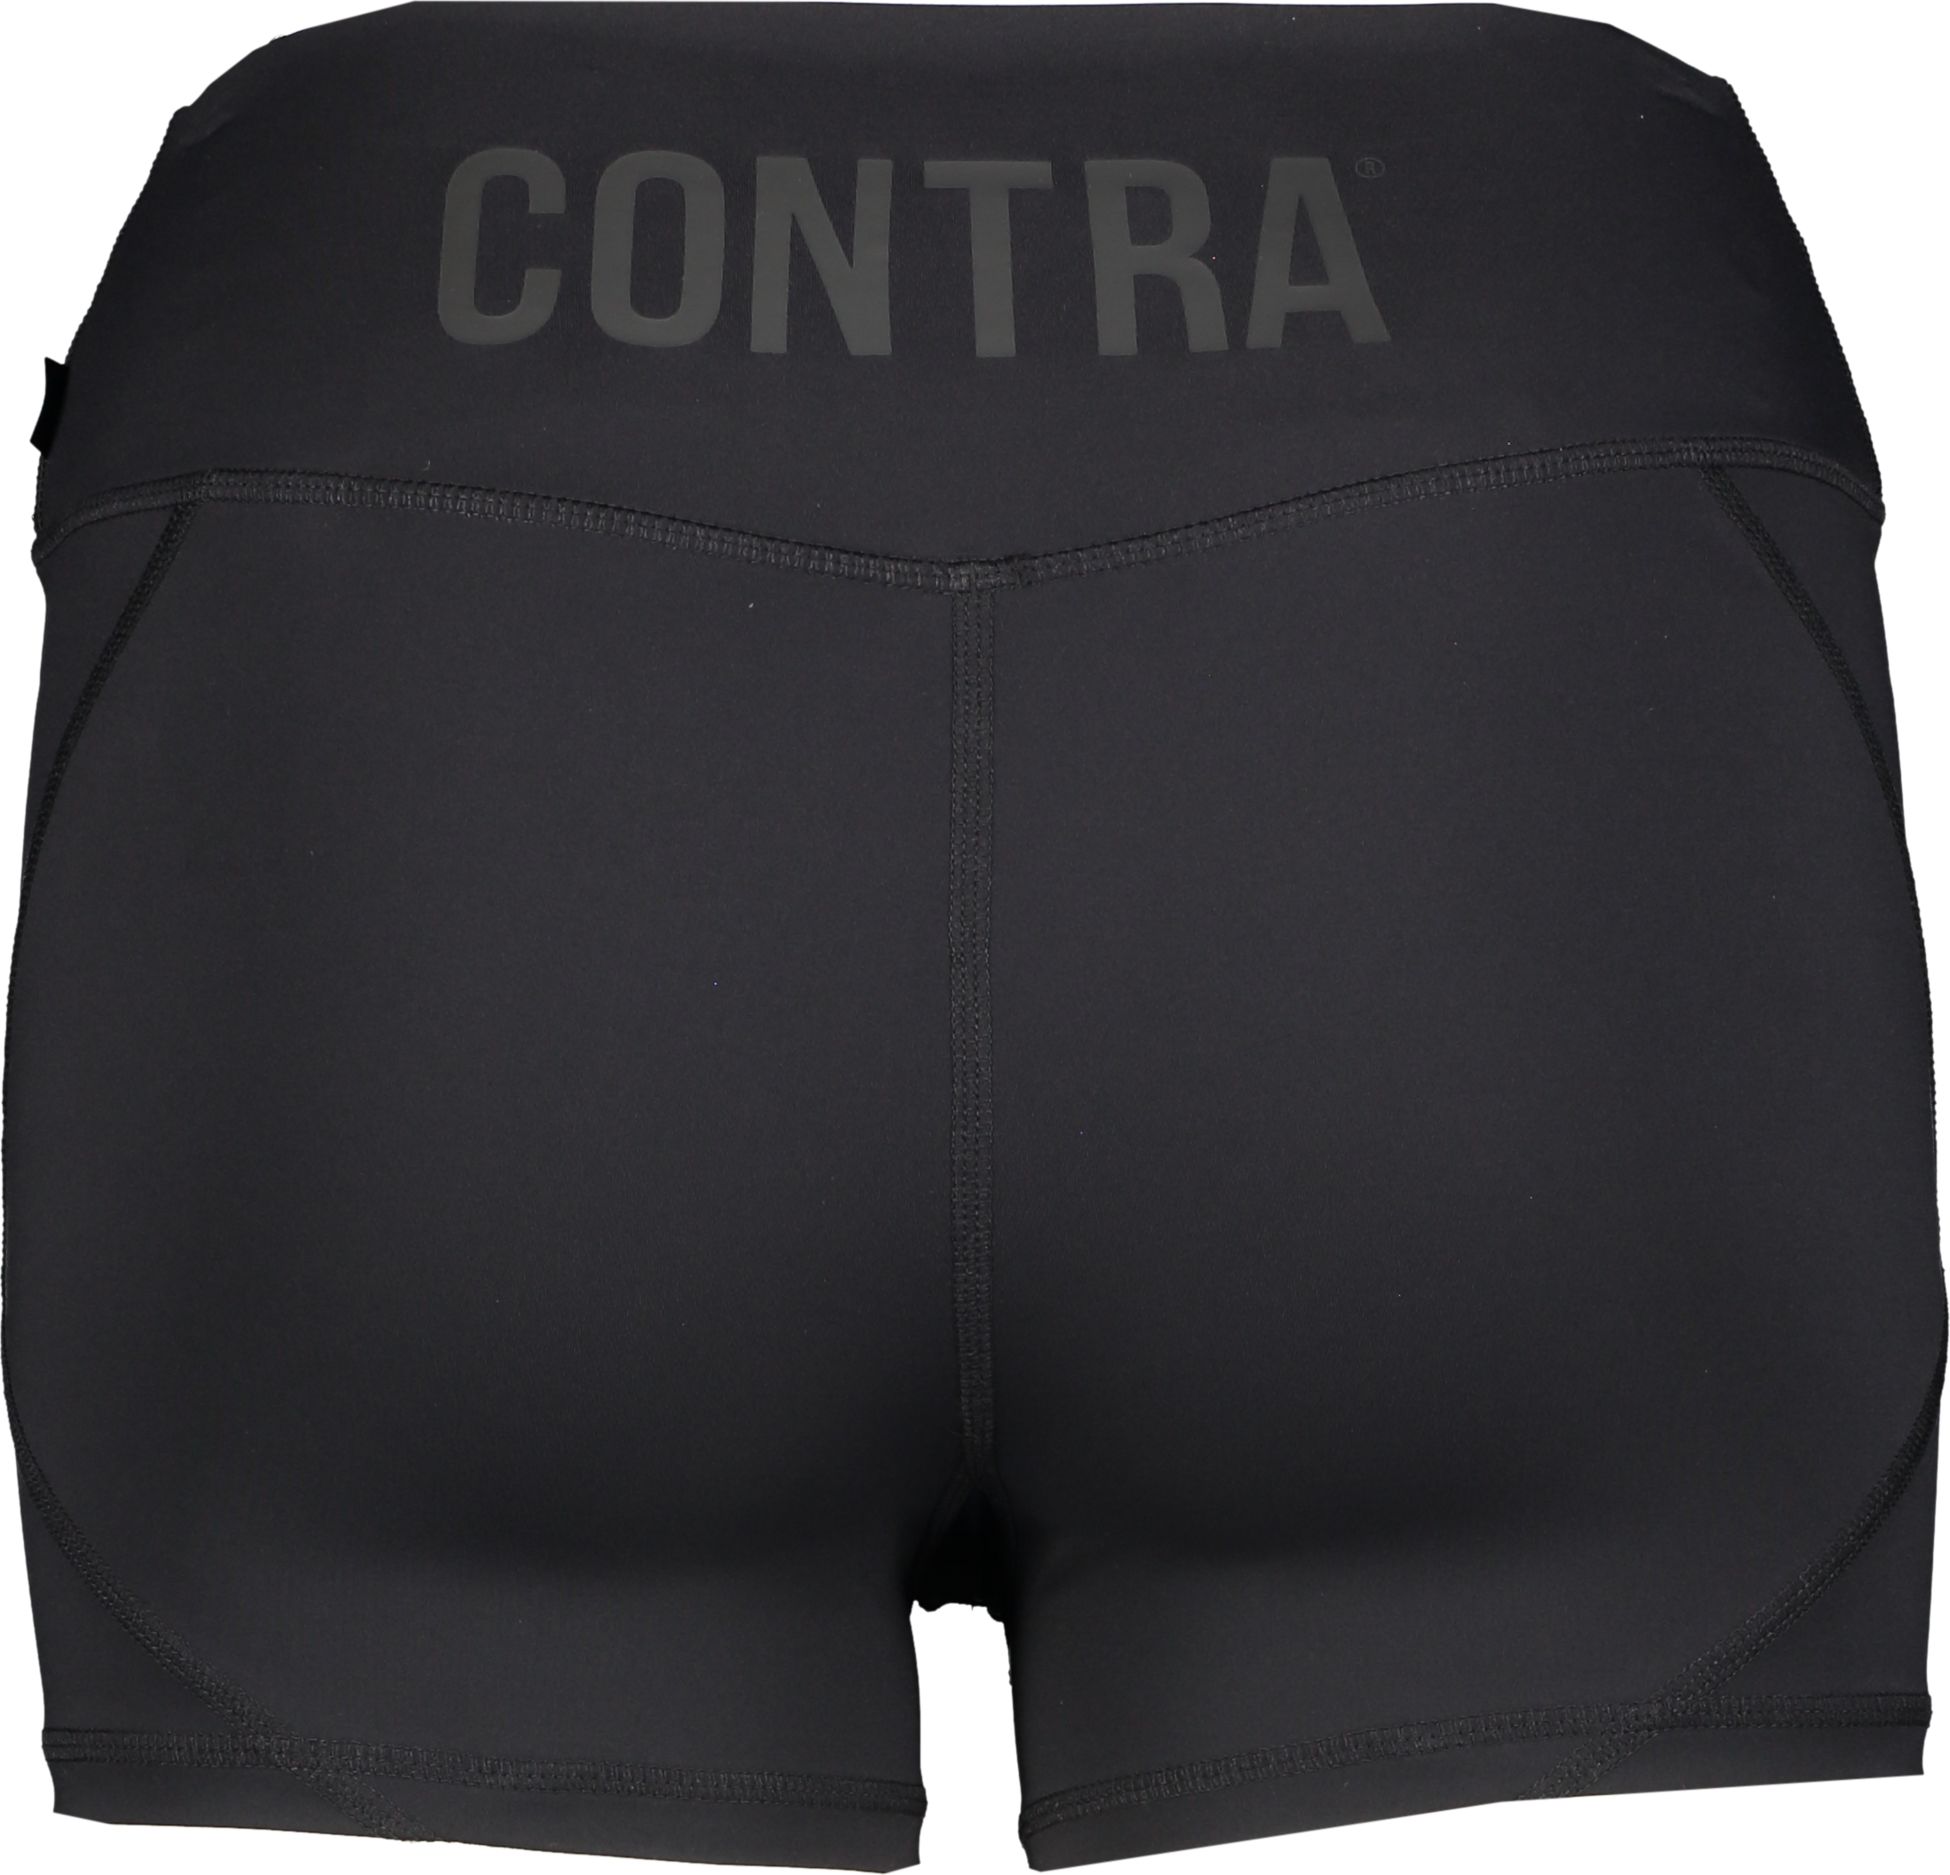 CONTRA, W CLEAN SHORTS